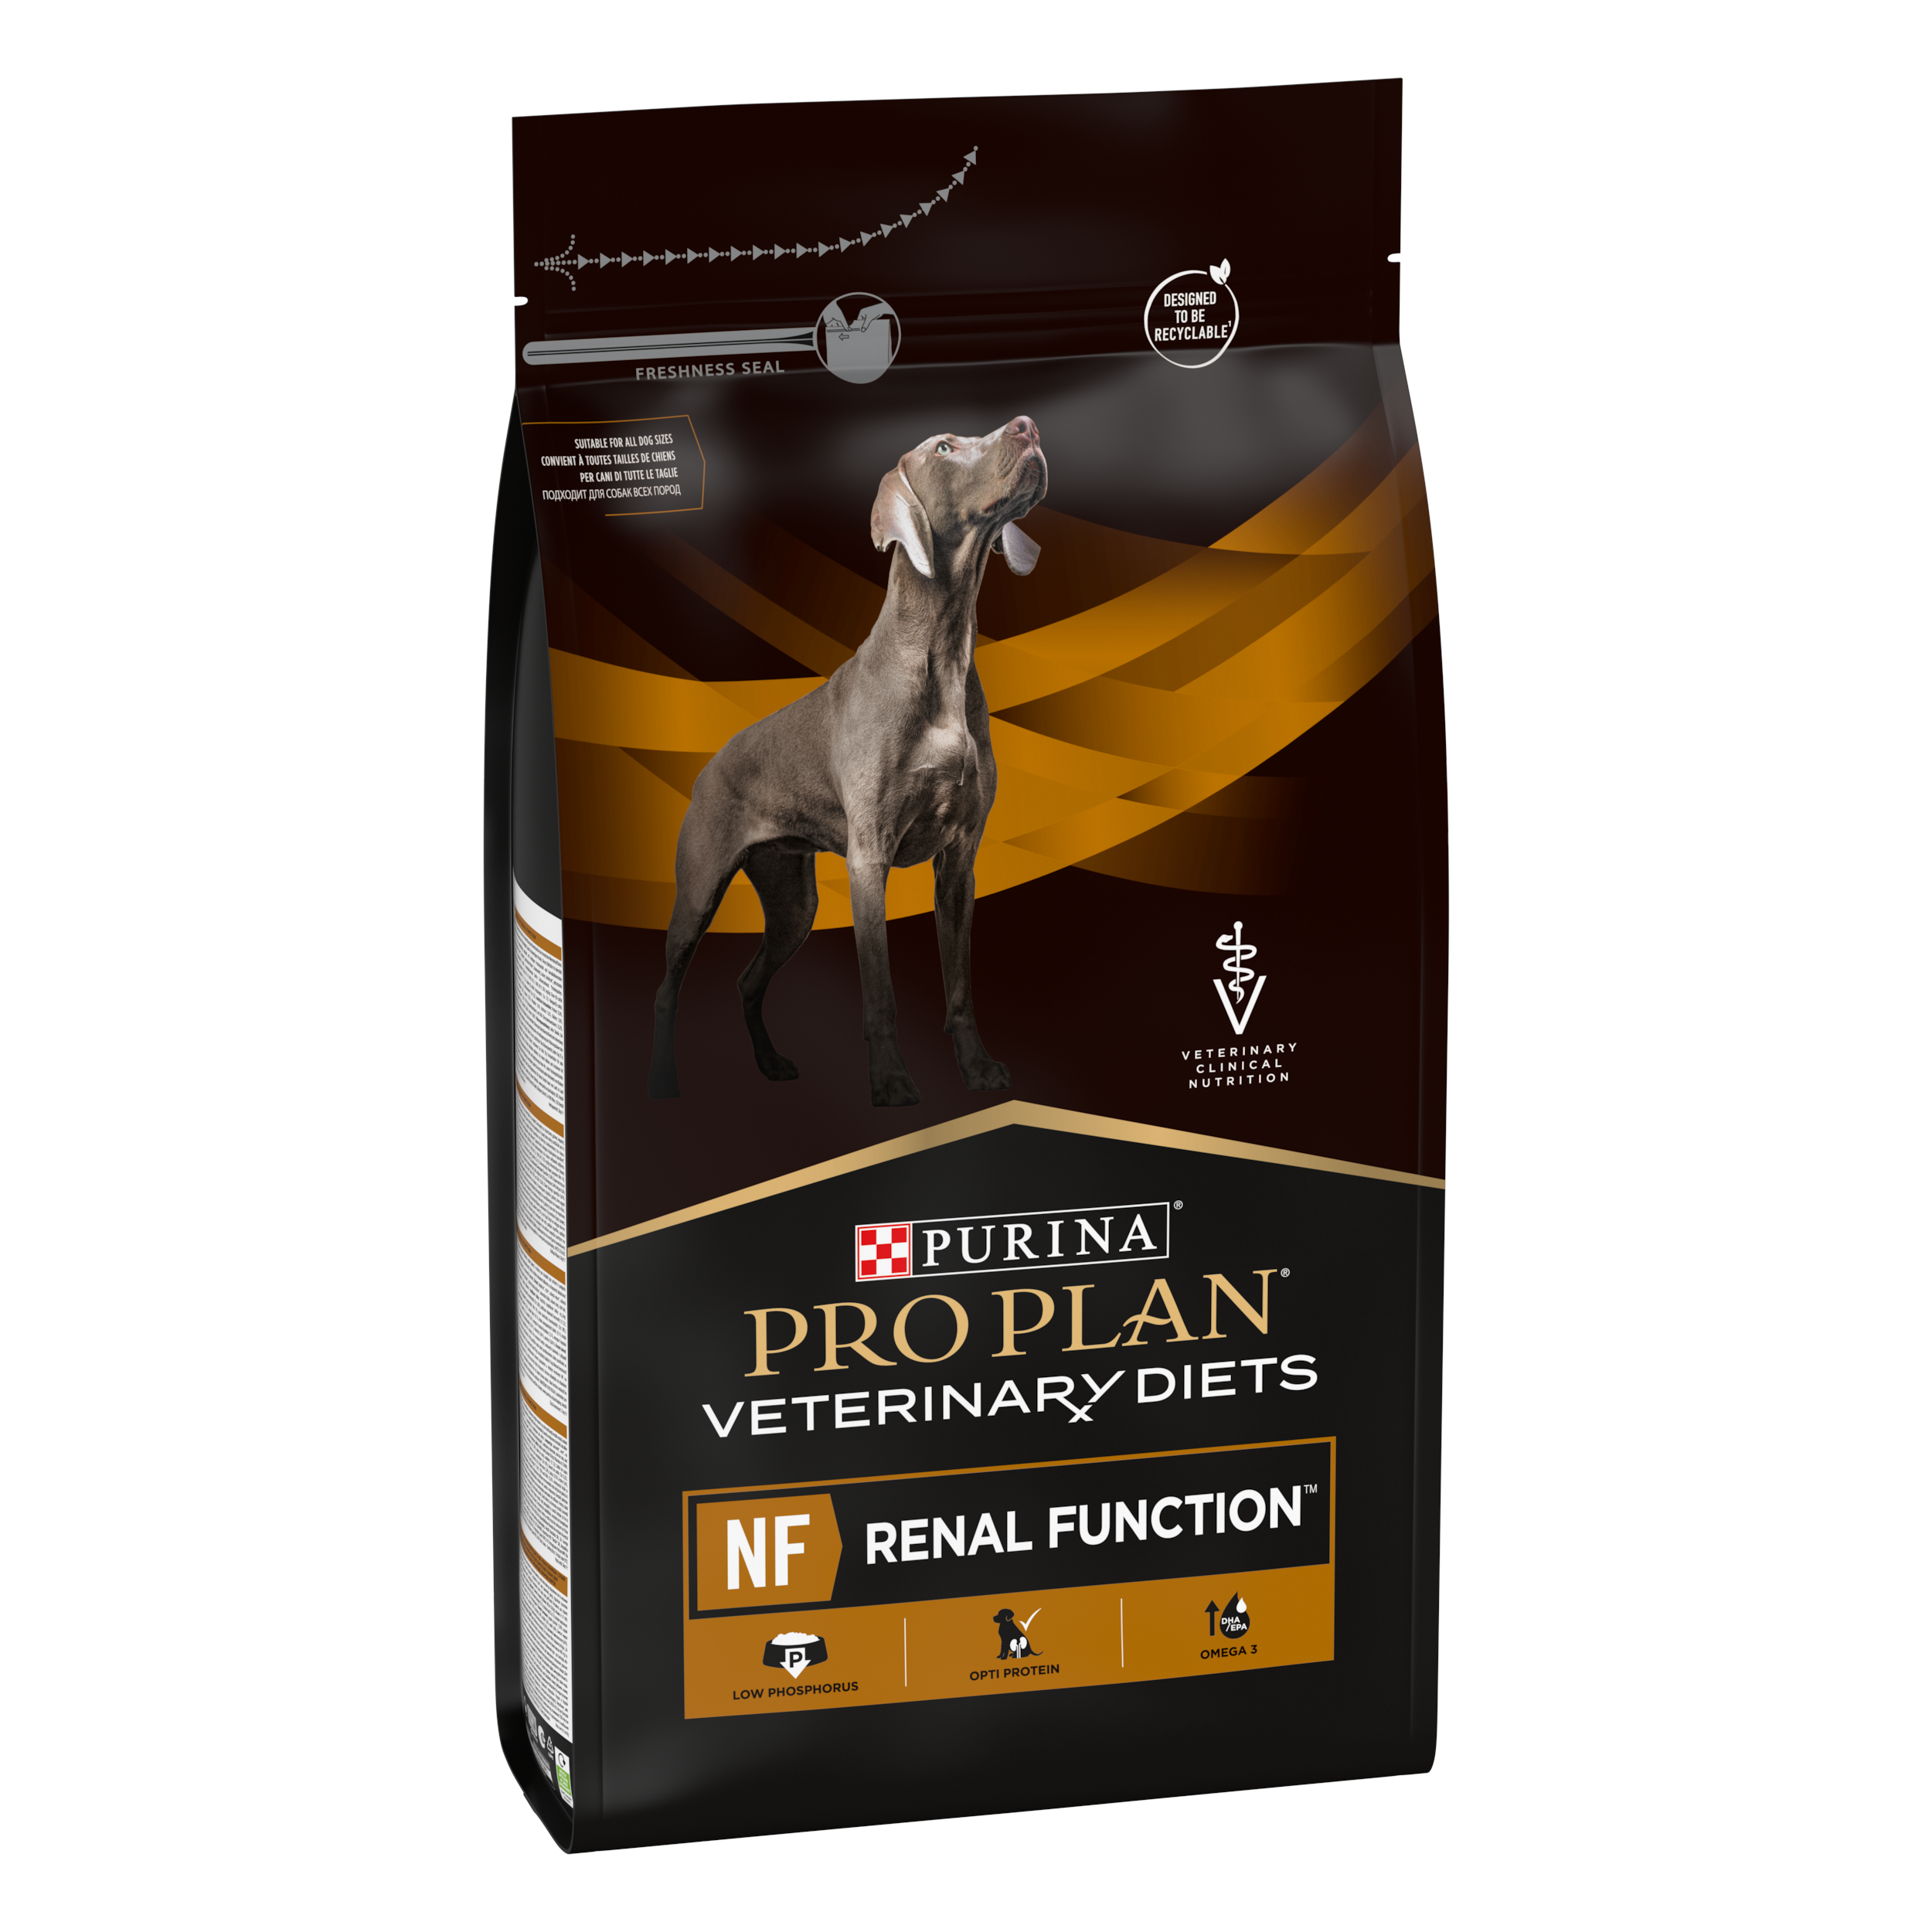 Purina Veterinary Diets Canine NF, Renal, 3 Kg